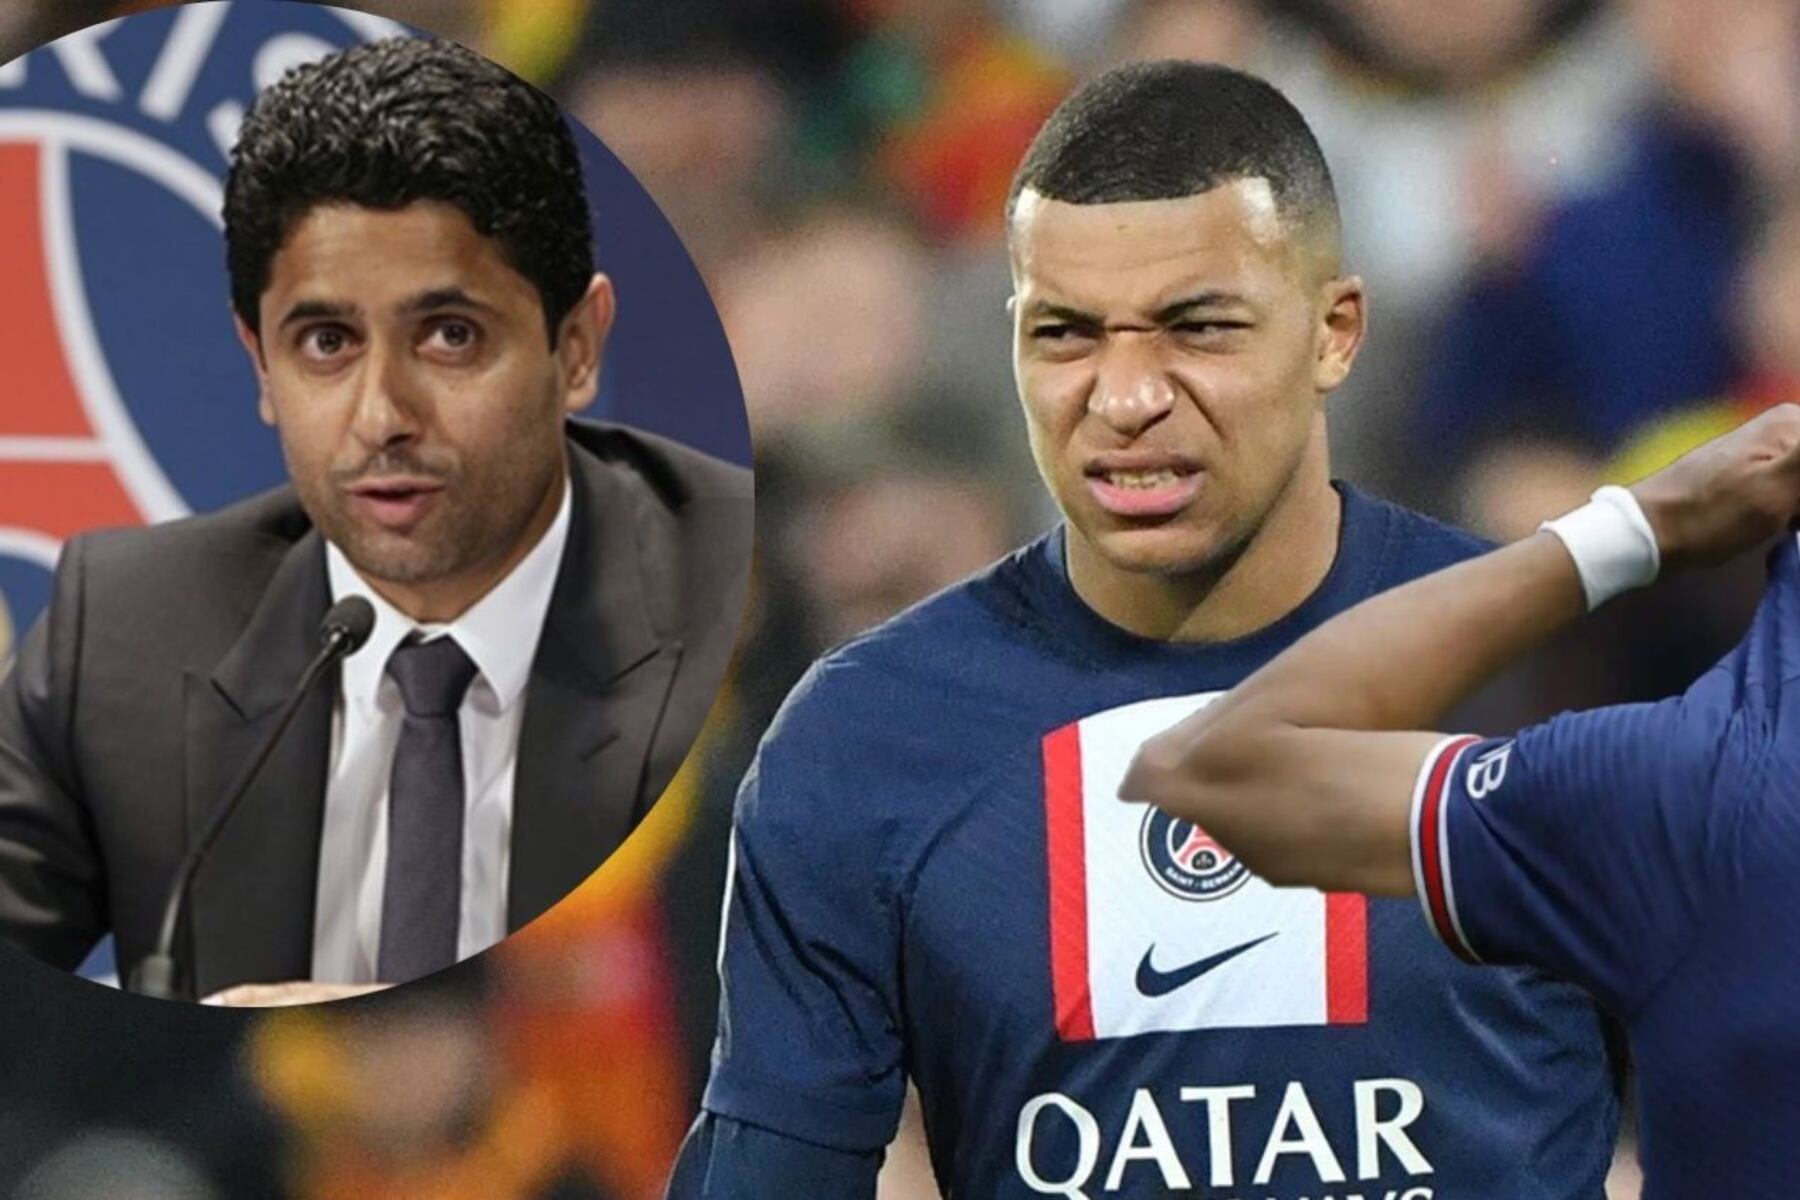 PSG's star who refuses to play with Mbappé because of his drama and wants him out immediately